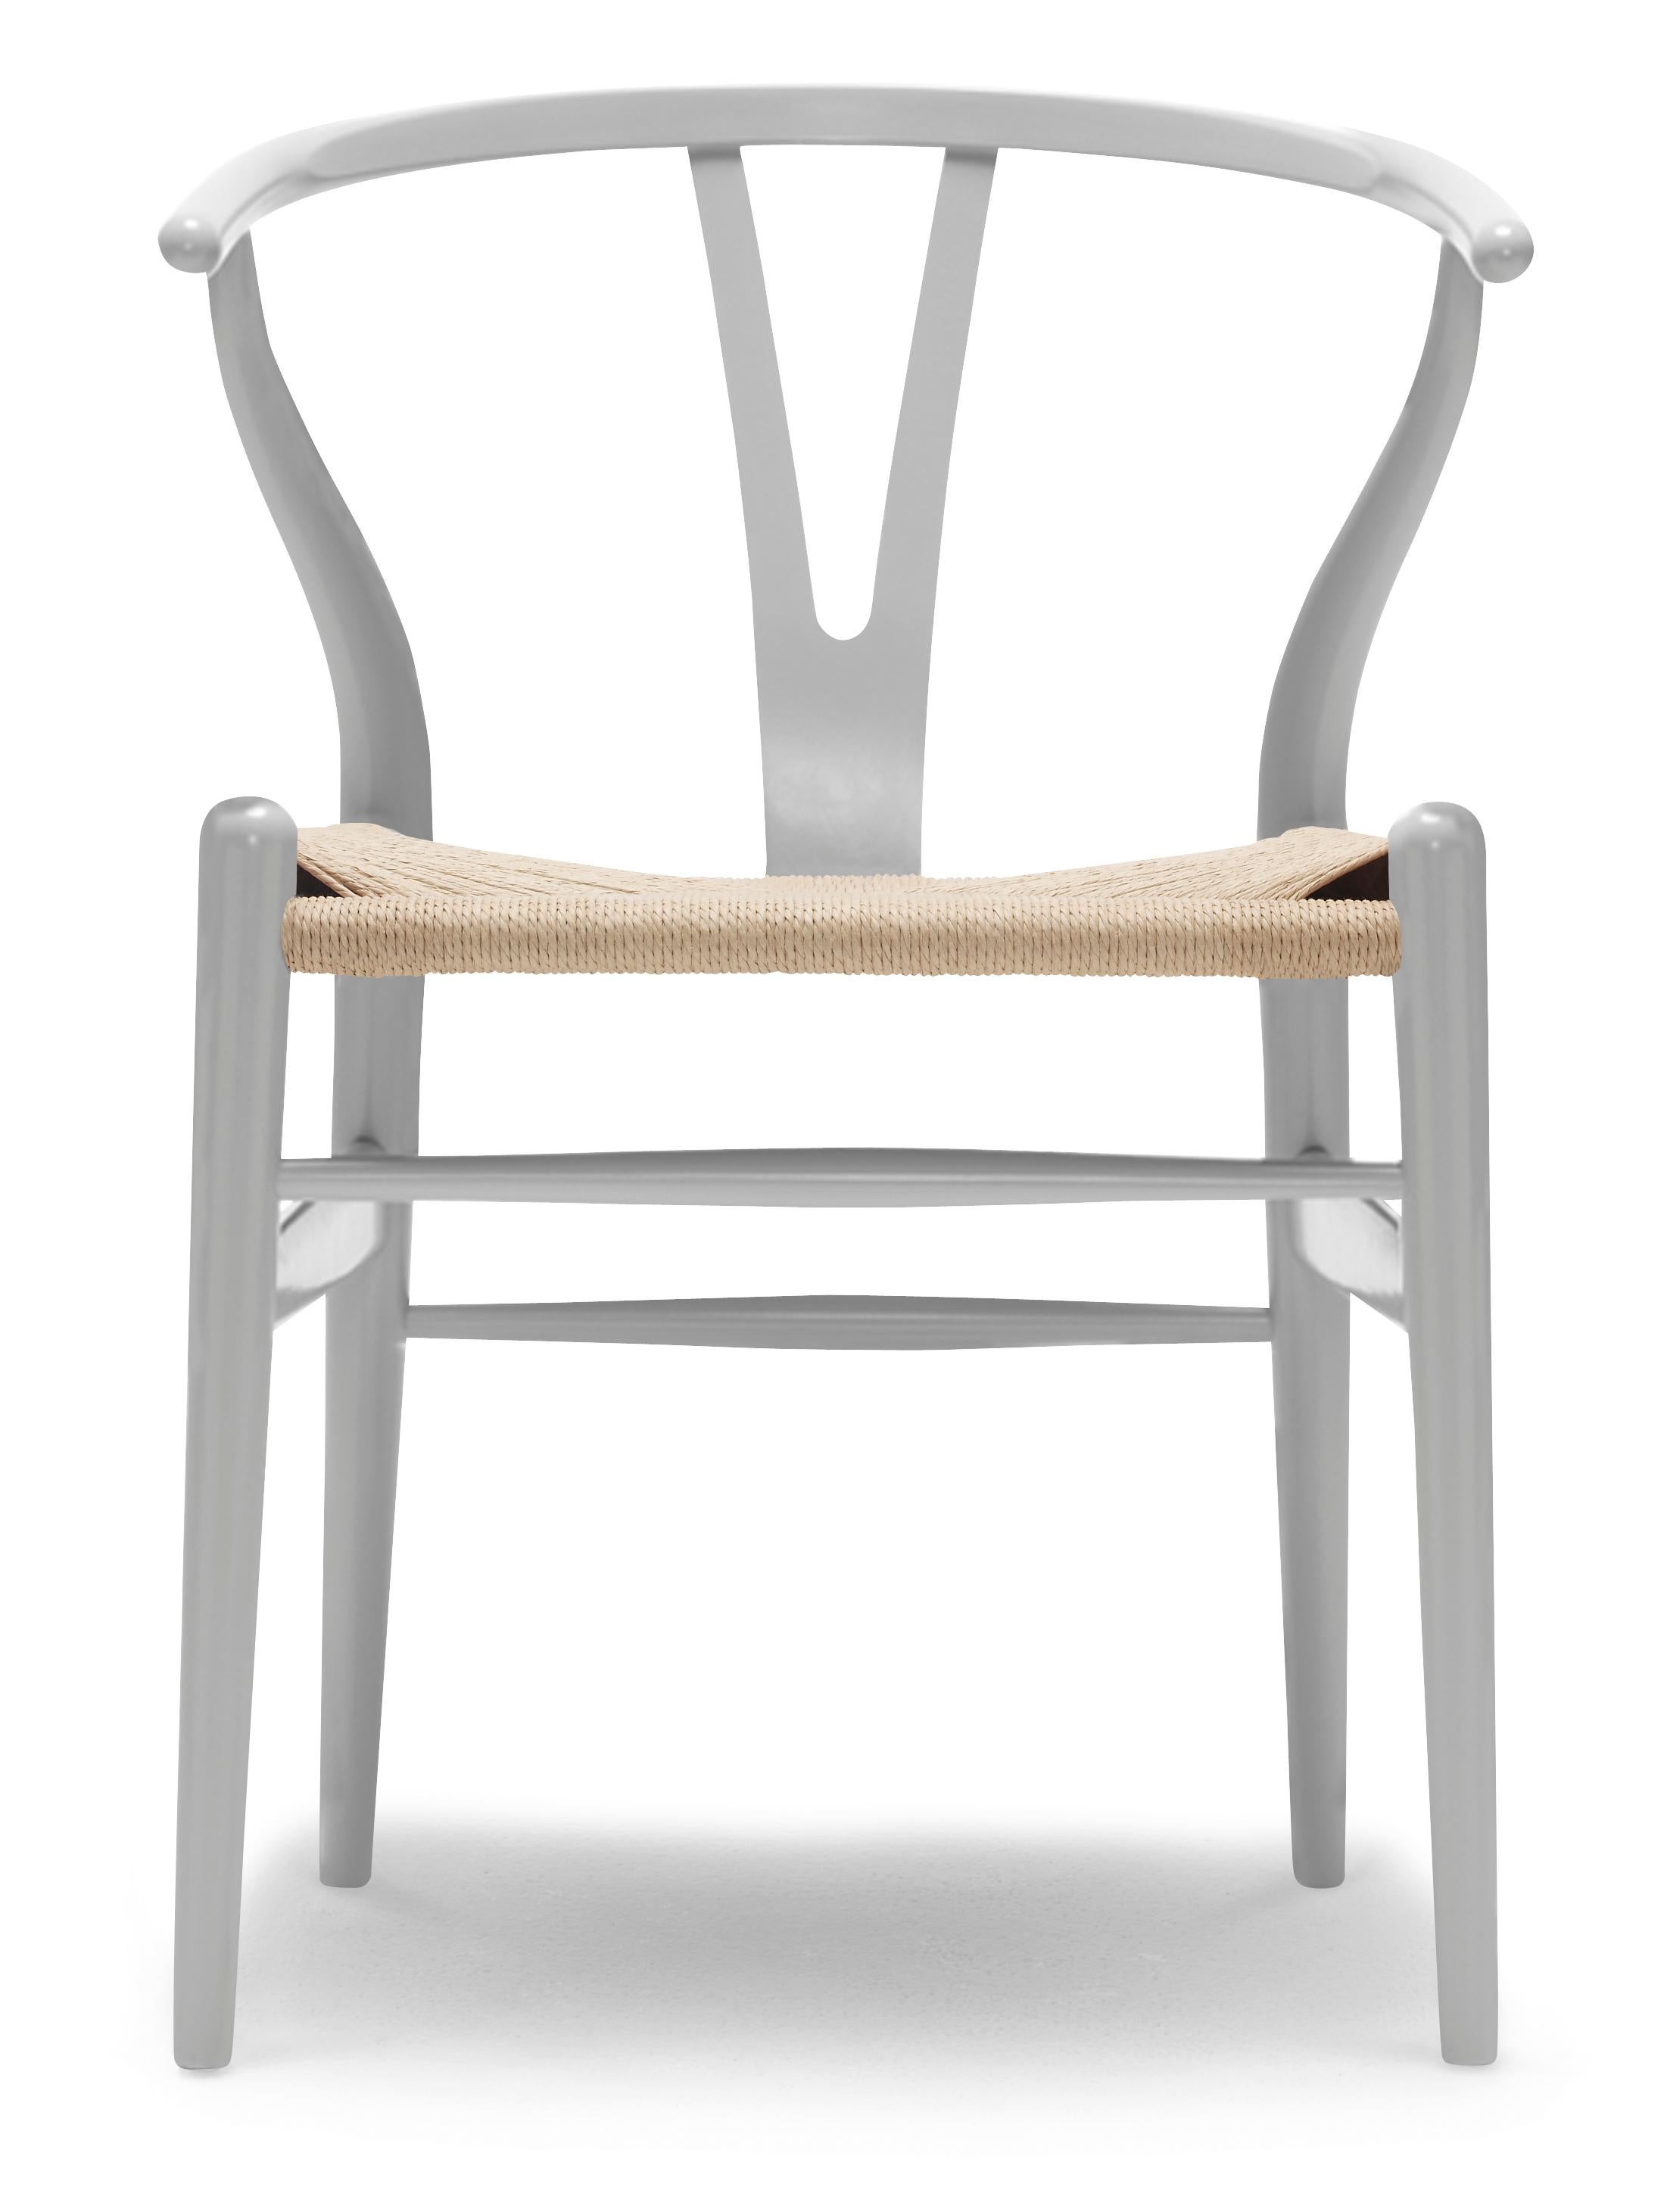 Gray (NCS S3502-Y) CH24 Wishbone Chair in Color Finishes with Natural Papercord Seat by Hans Wegner